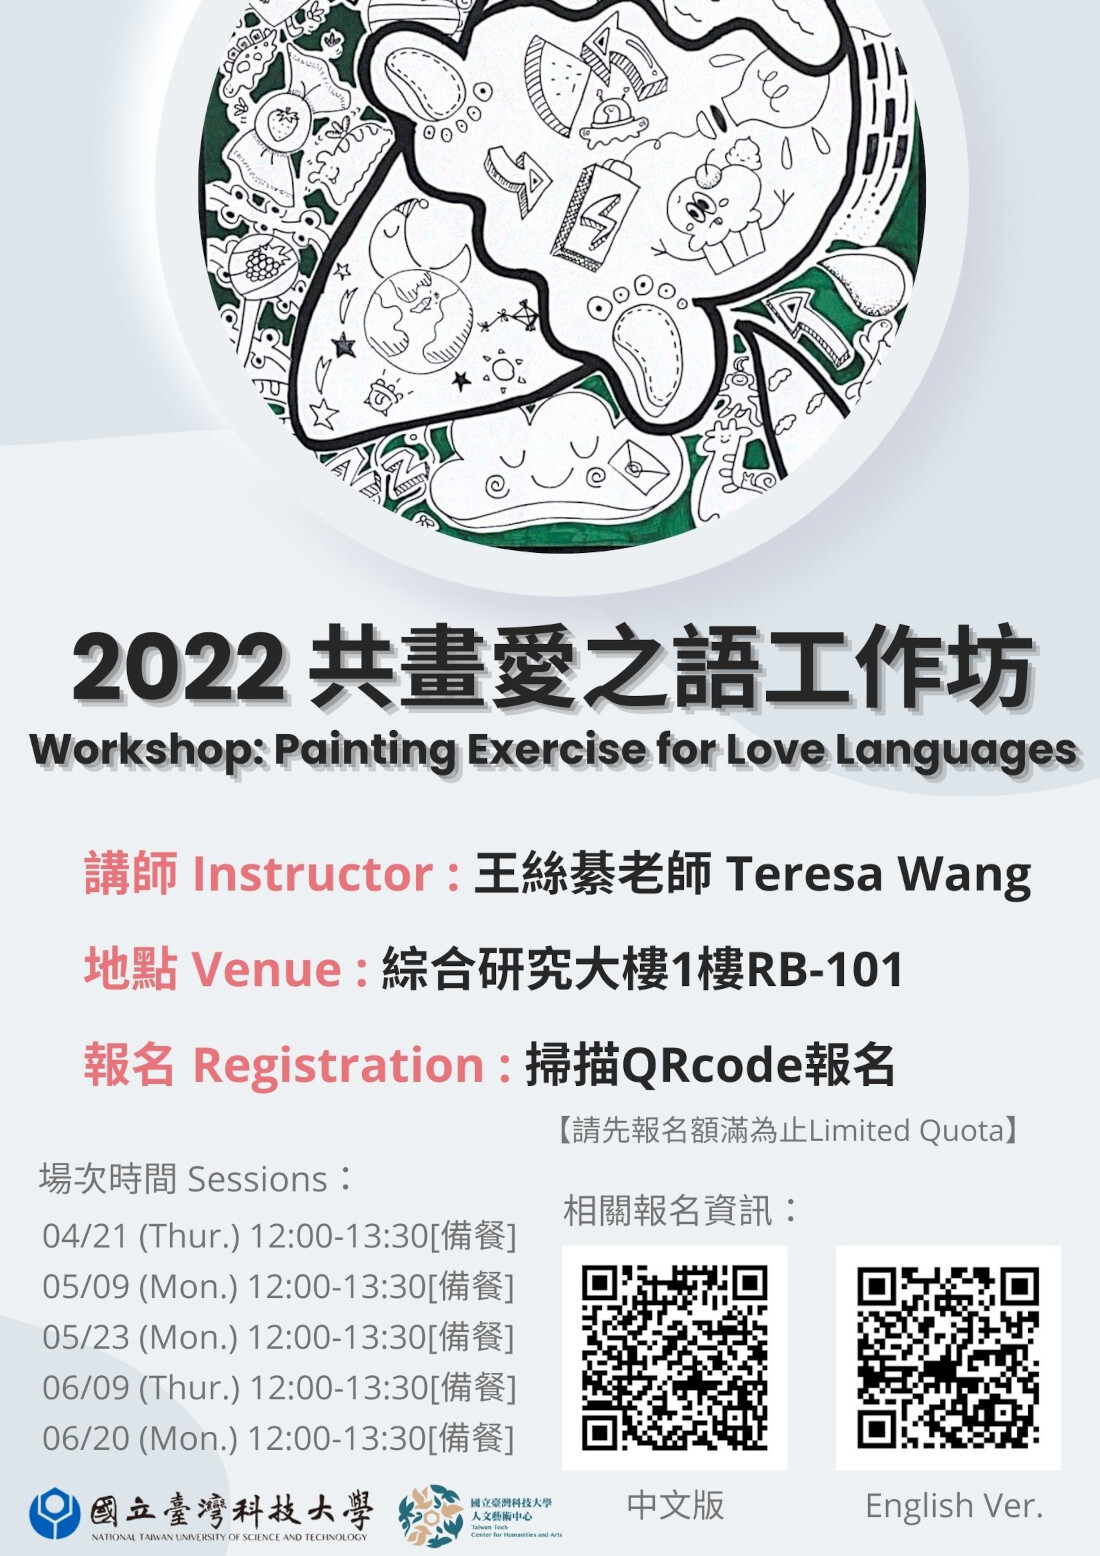 Poster for 2022 Workshop: Painting Exercise for Love Languages